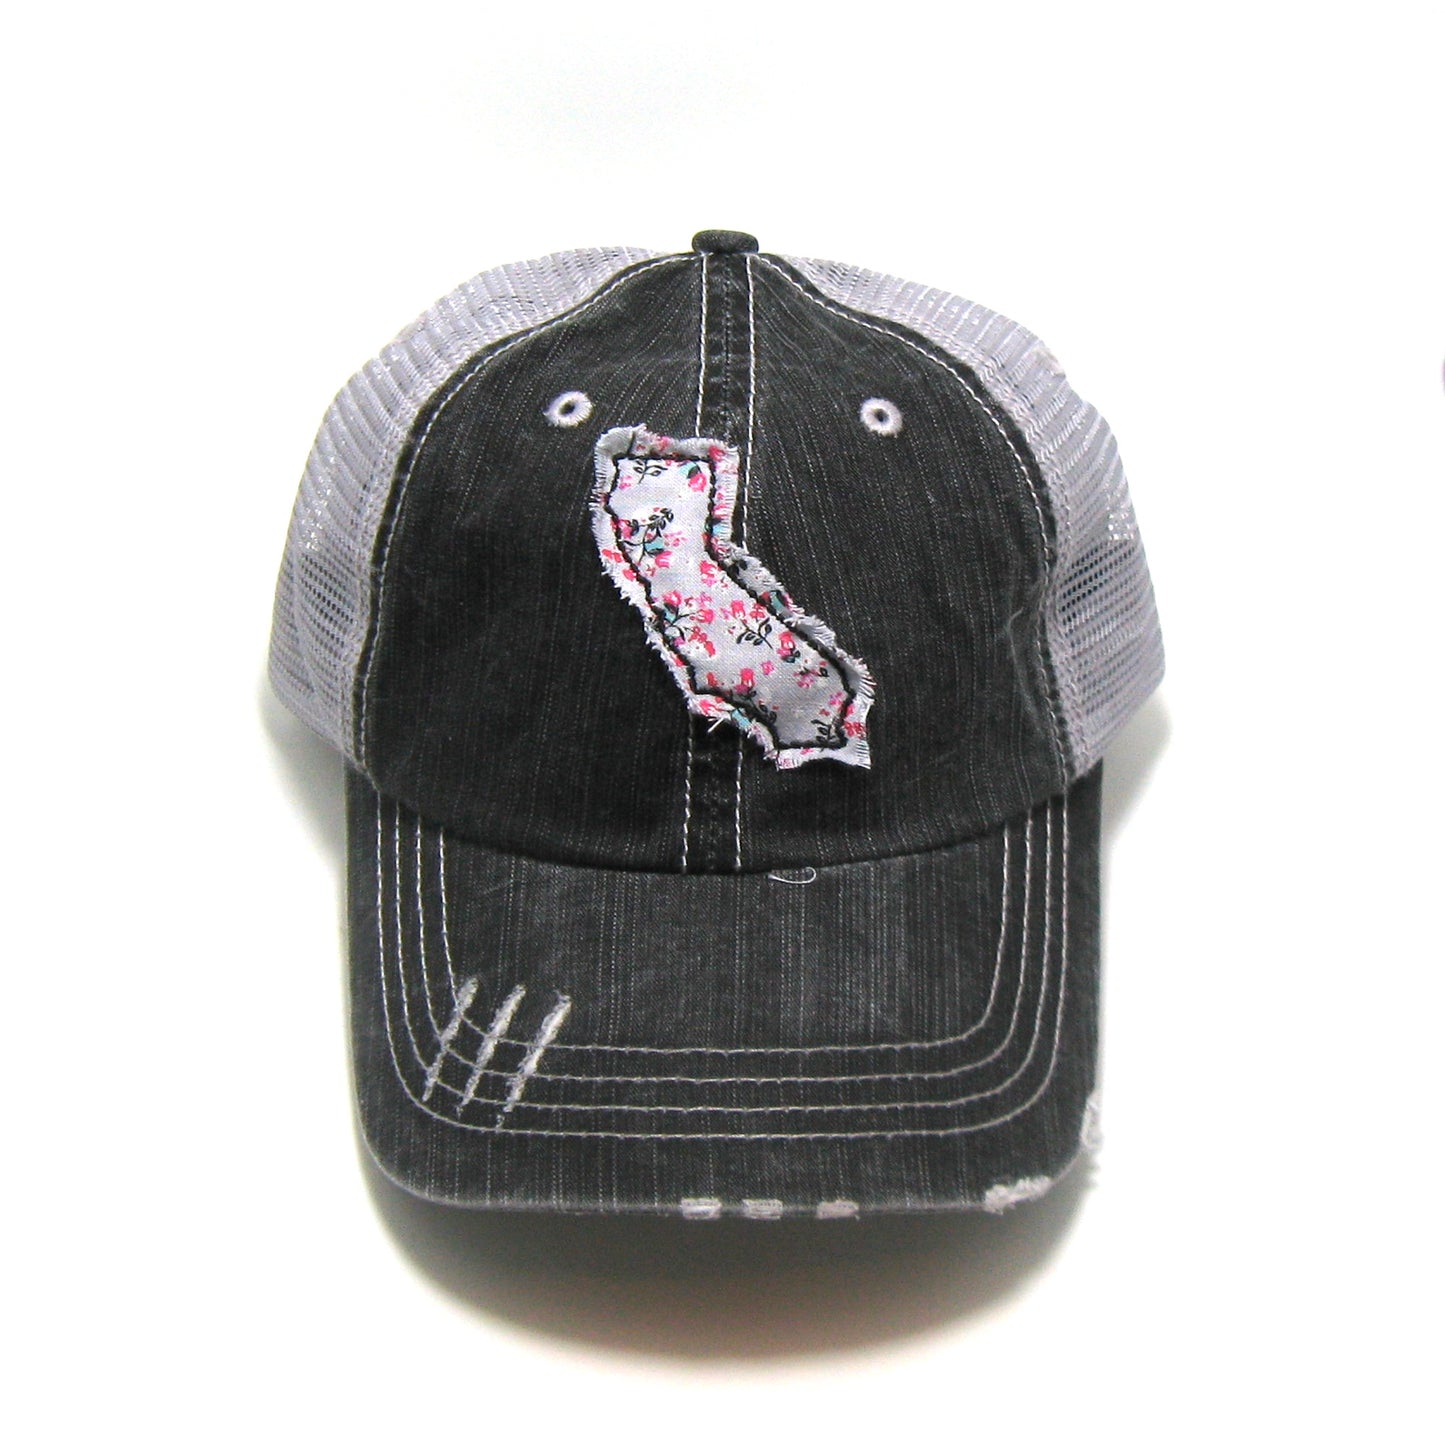 gray distressed trucker hat with gray floral fabric state of California